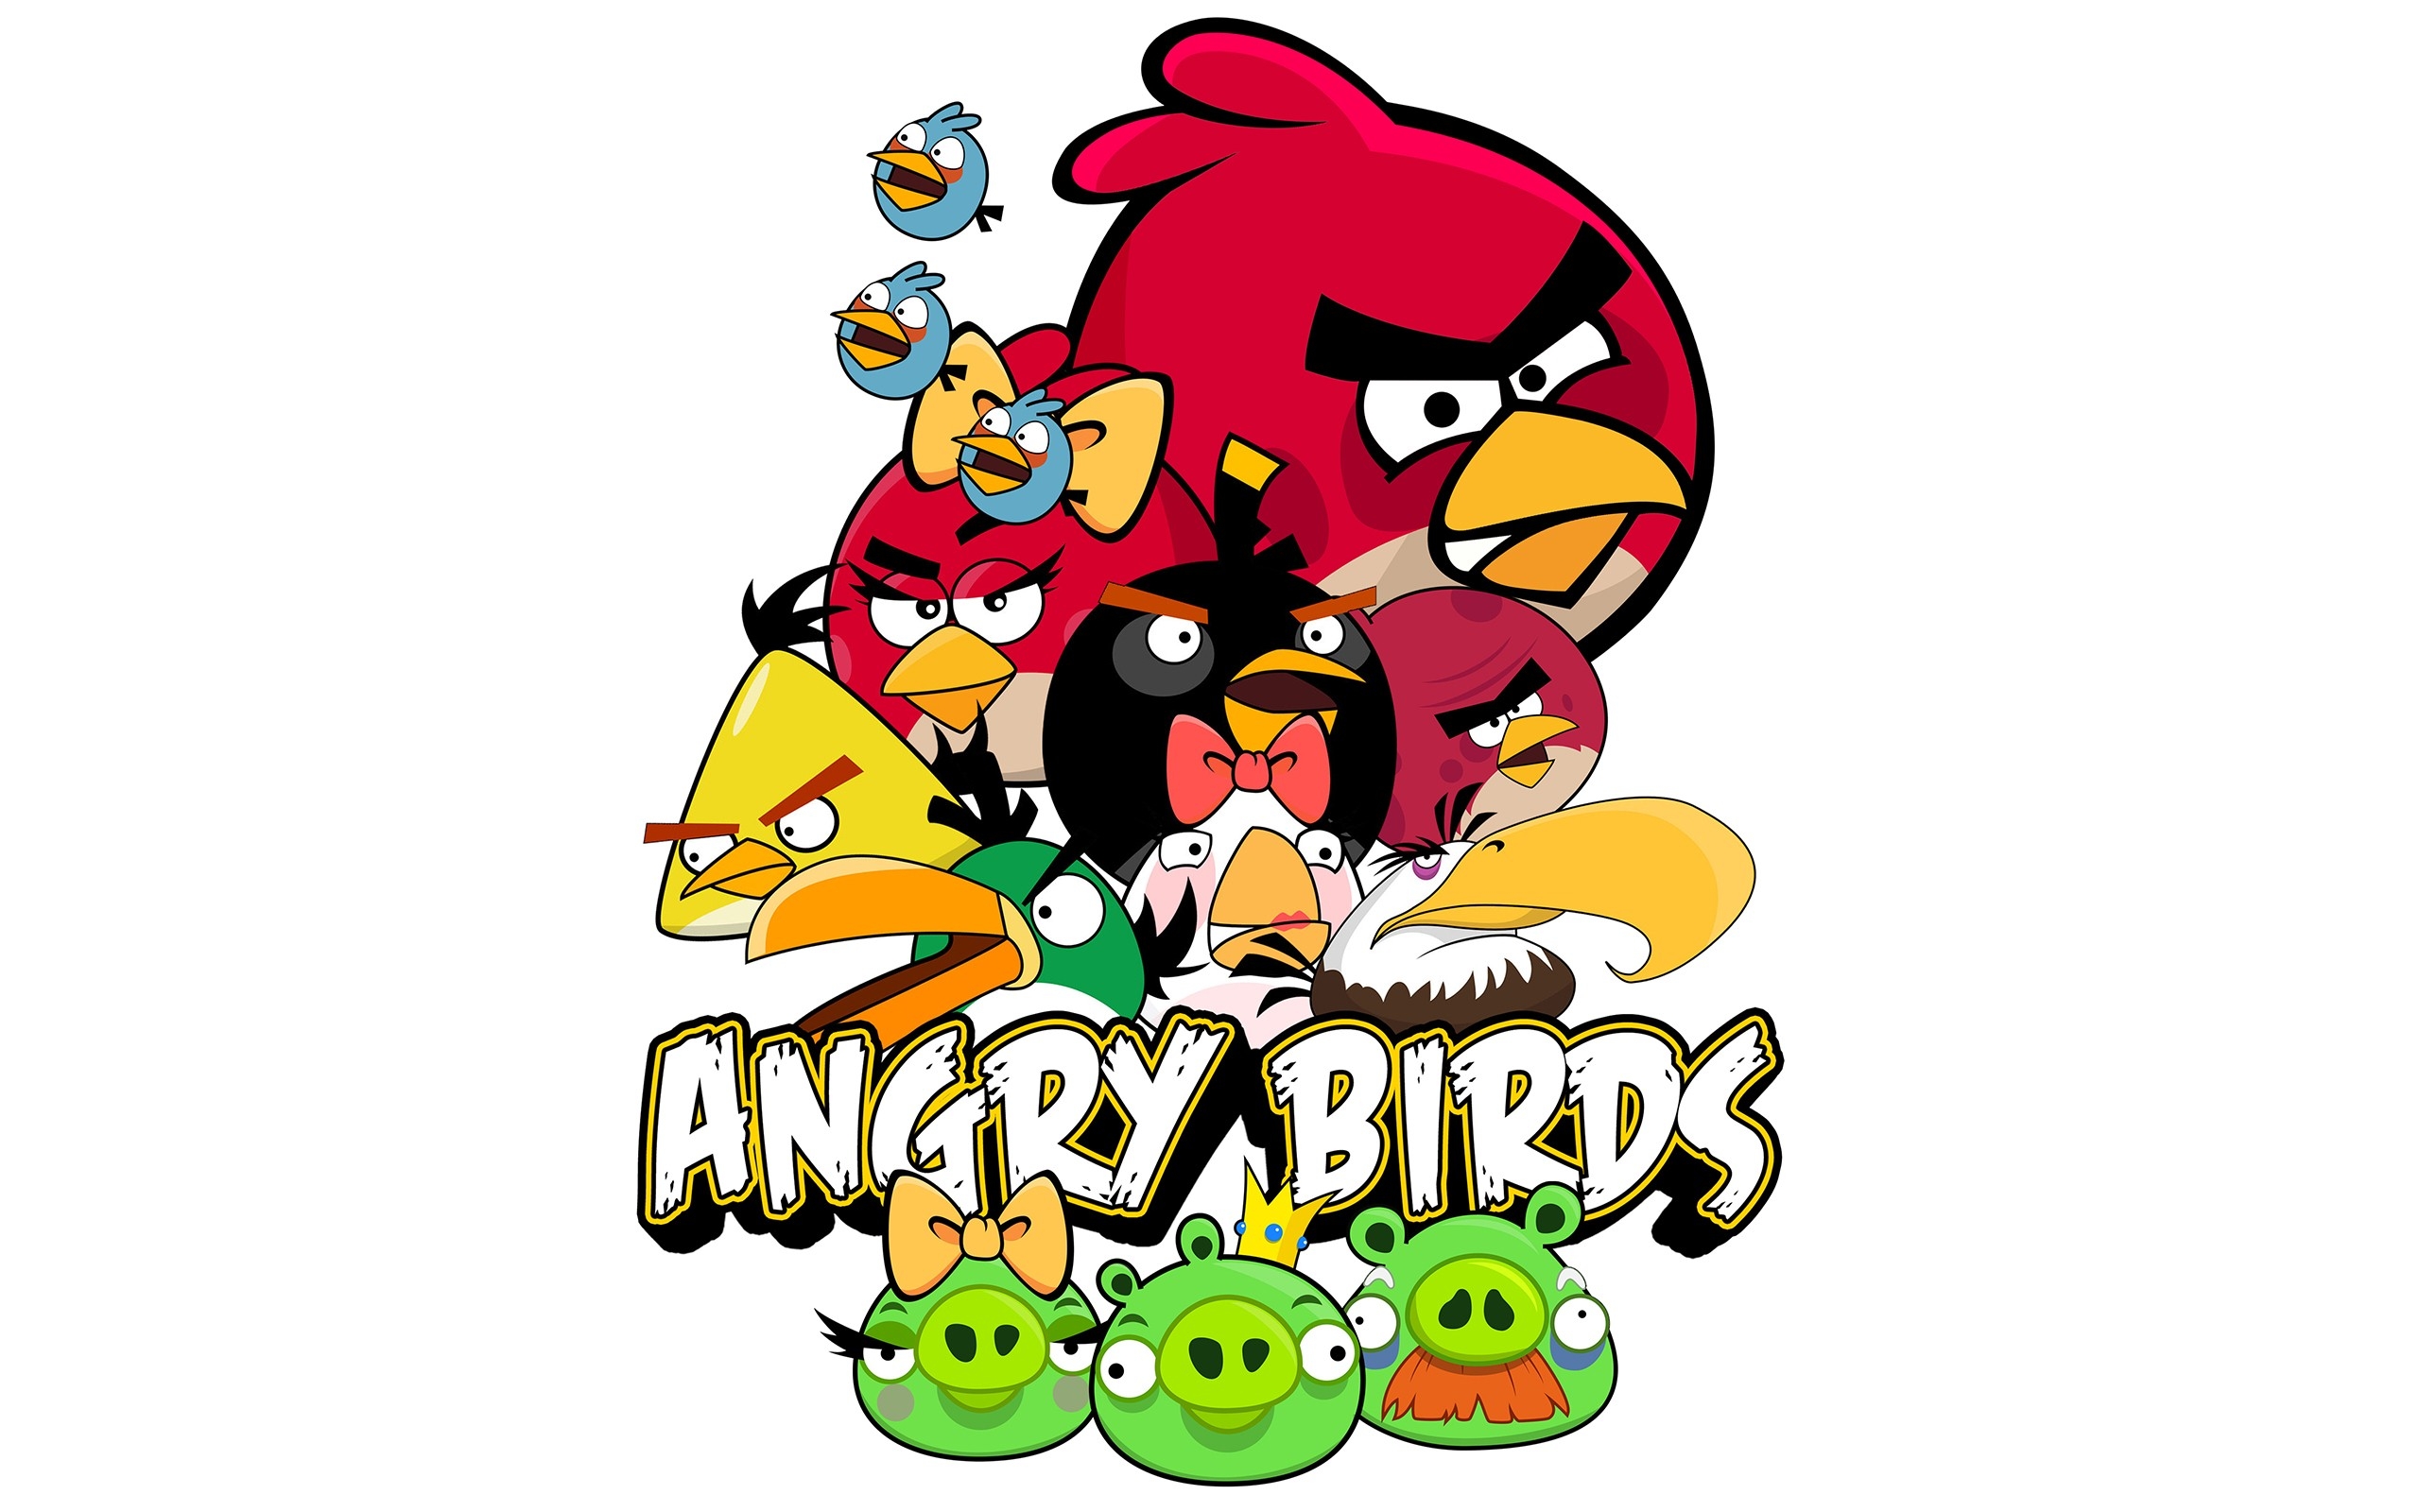 Angry Bird Wallpaper Cute - Angry Birds Hd Png - HD Wallpaper 